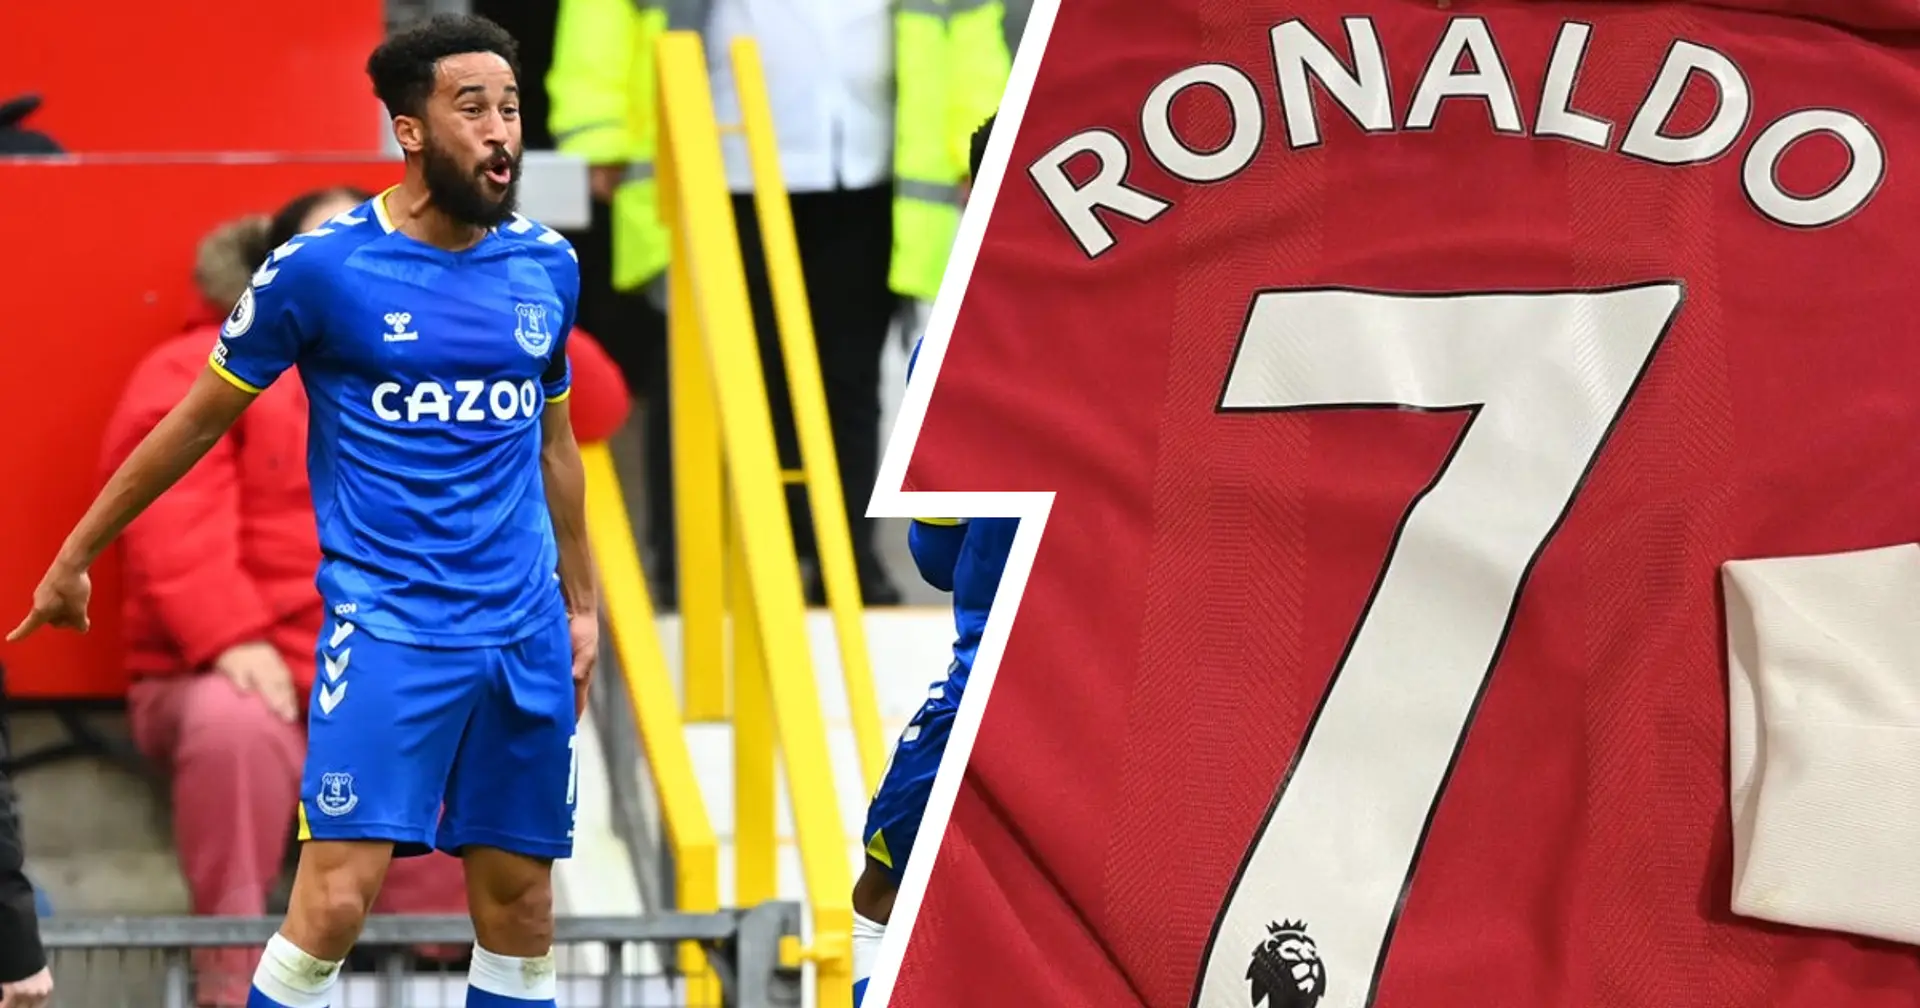 'Nothing but respect to the GOAT': Andros Townsend swaps shirts with Ronaldo after imitating 'SIIIUUU' celebration